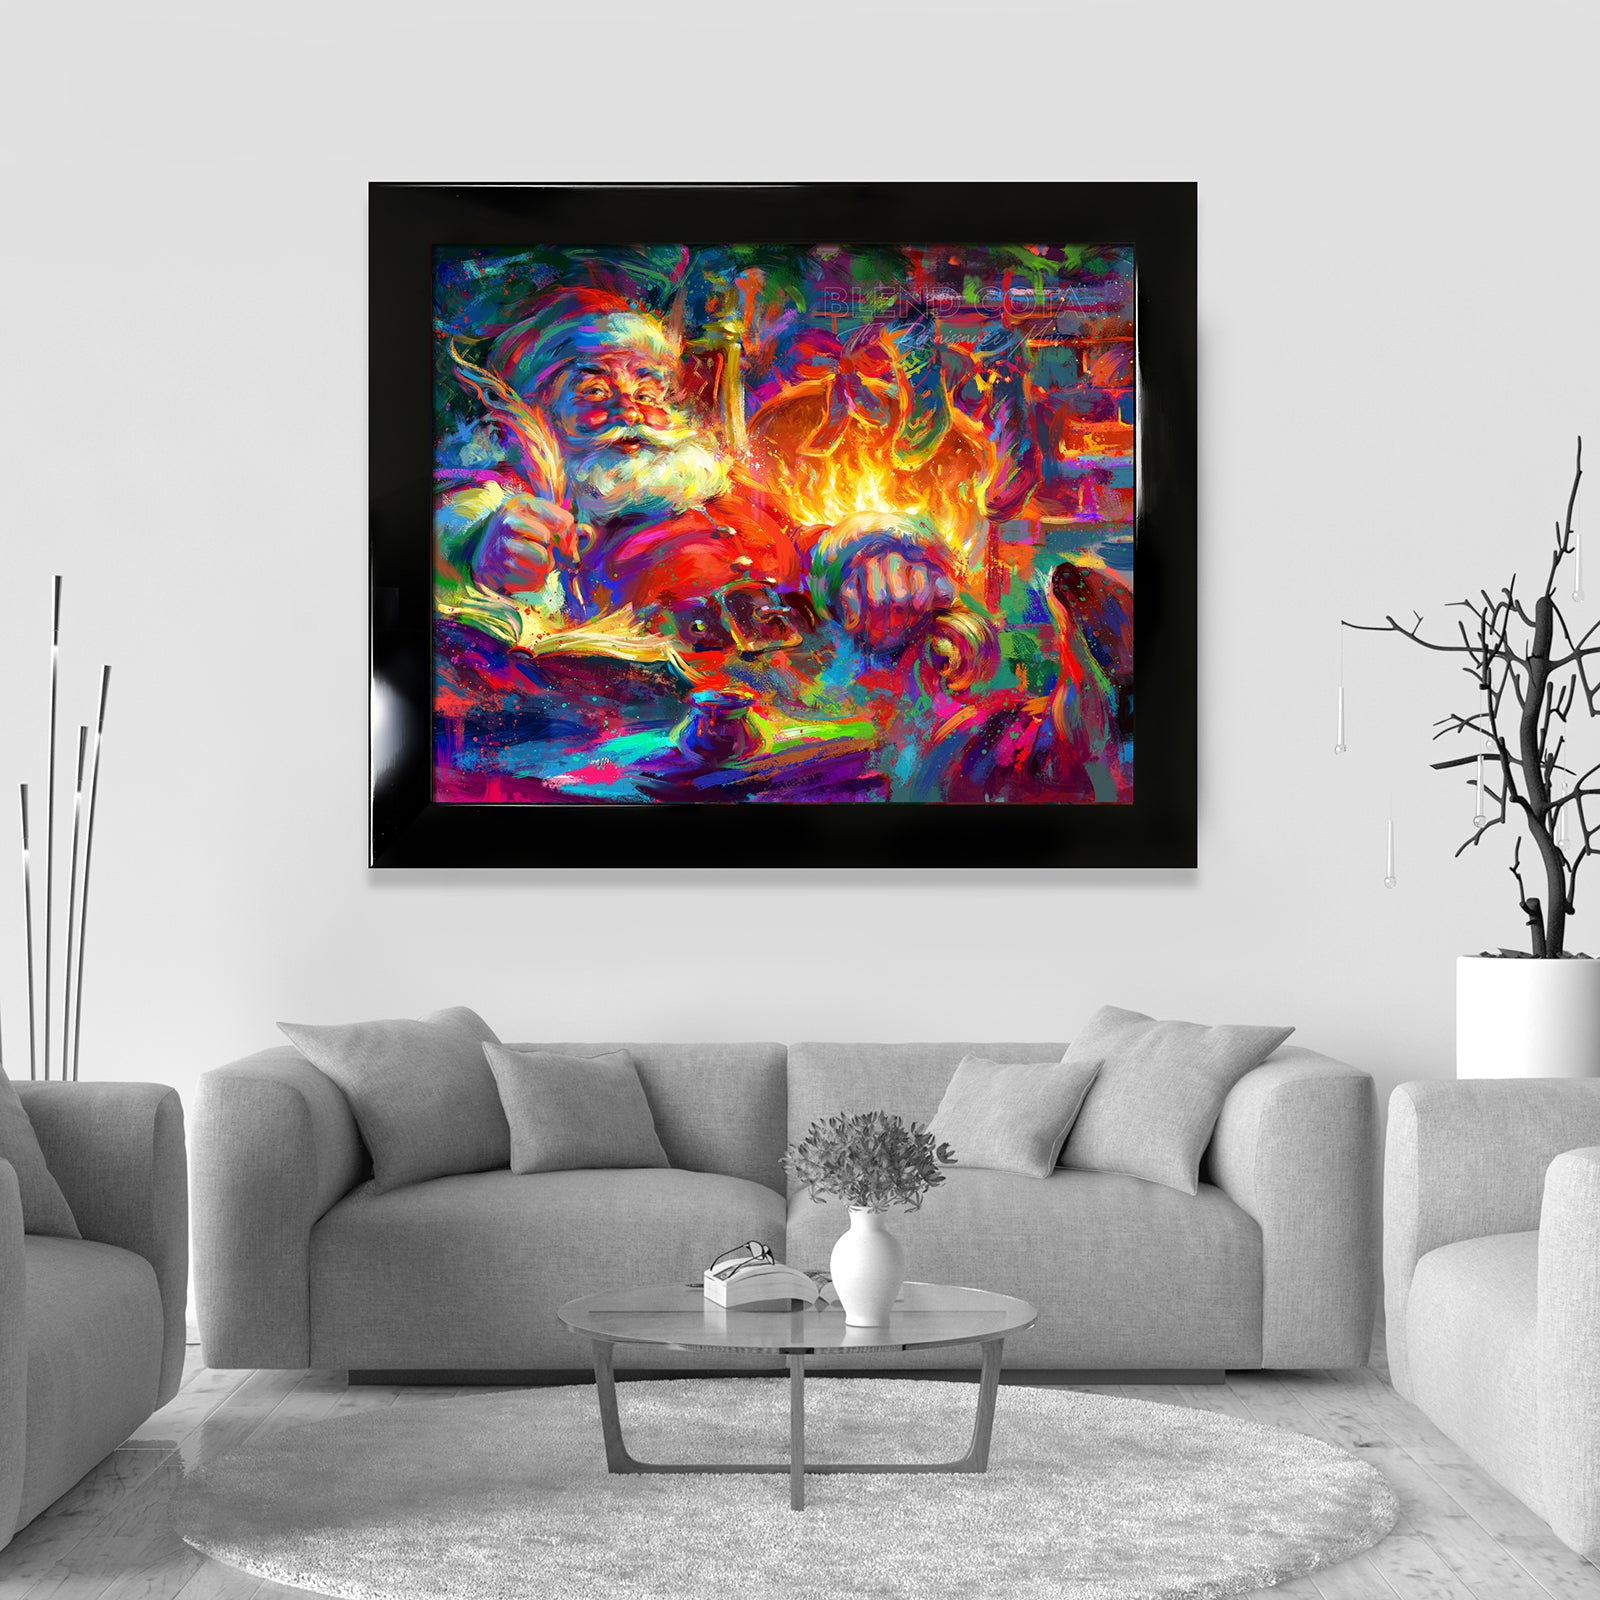 original oil paintings framed variety of colorful paintings by master of color blend cota showcase  images paintings and art pieces in a room setting - Blend Cota original oil painting - blended expressionism- blend cota studios art